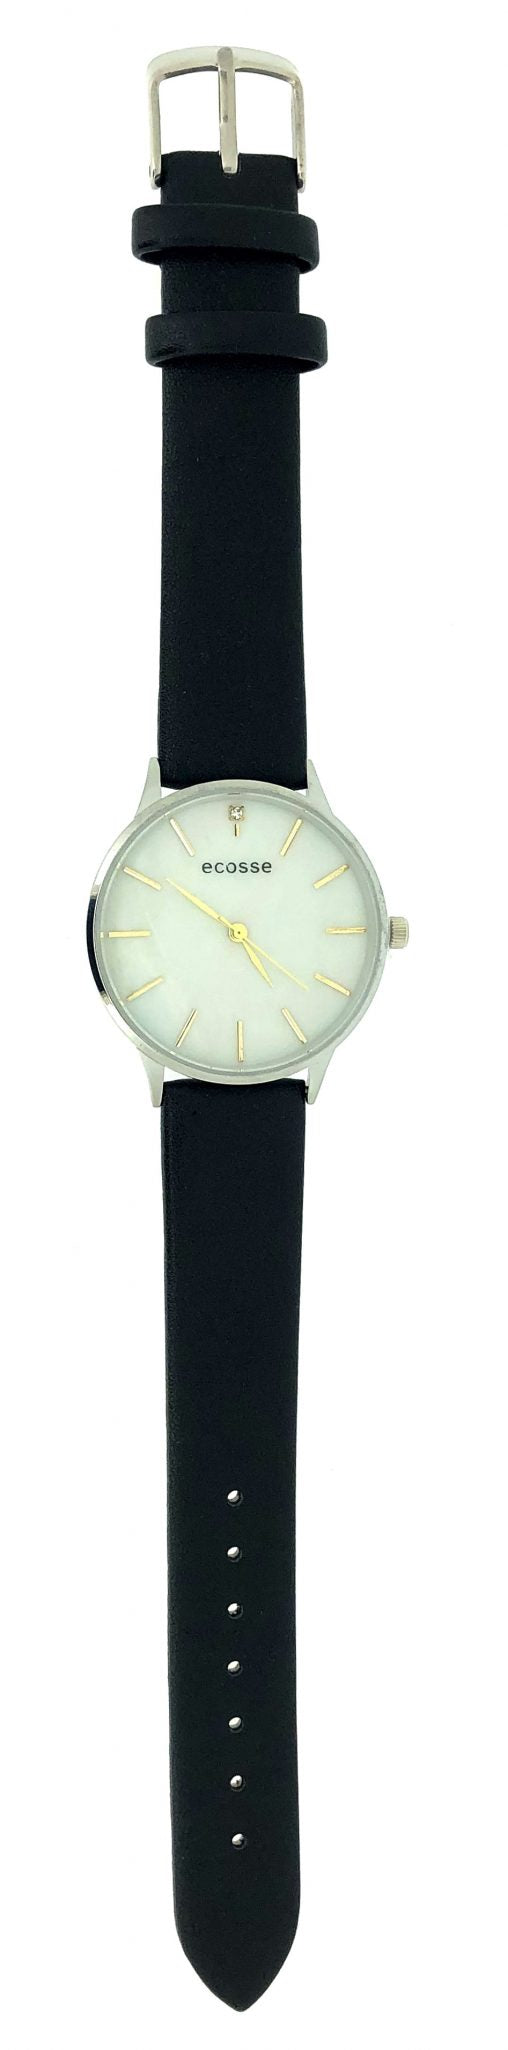 Ladies Watch with Black Band